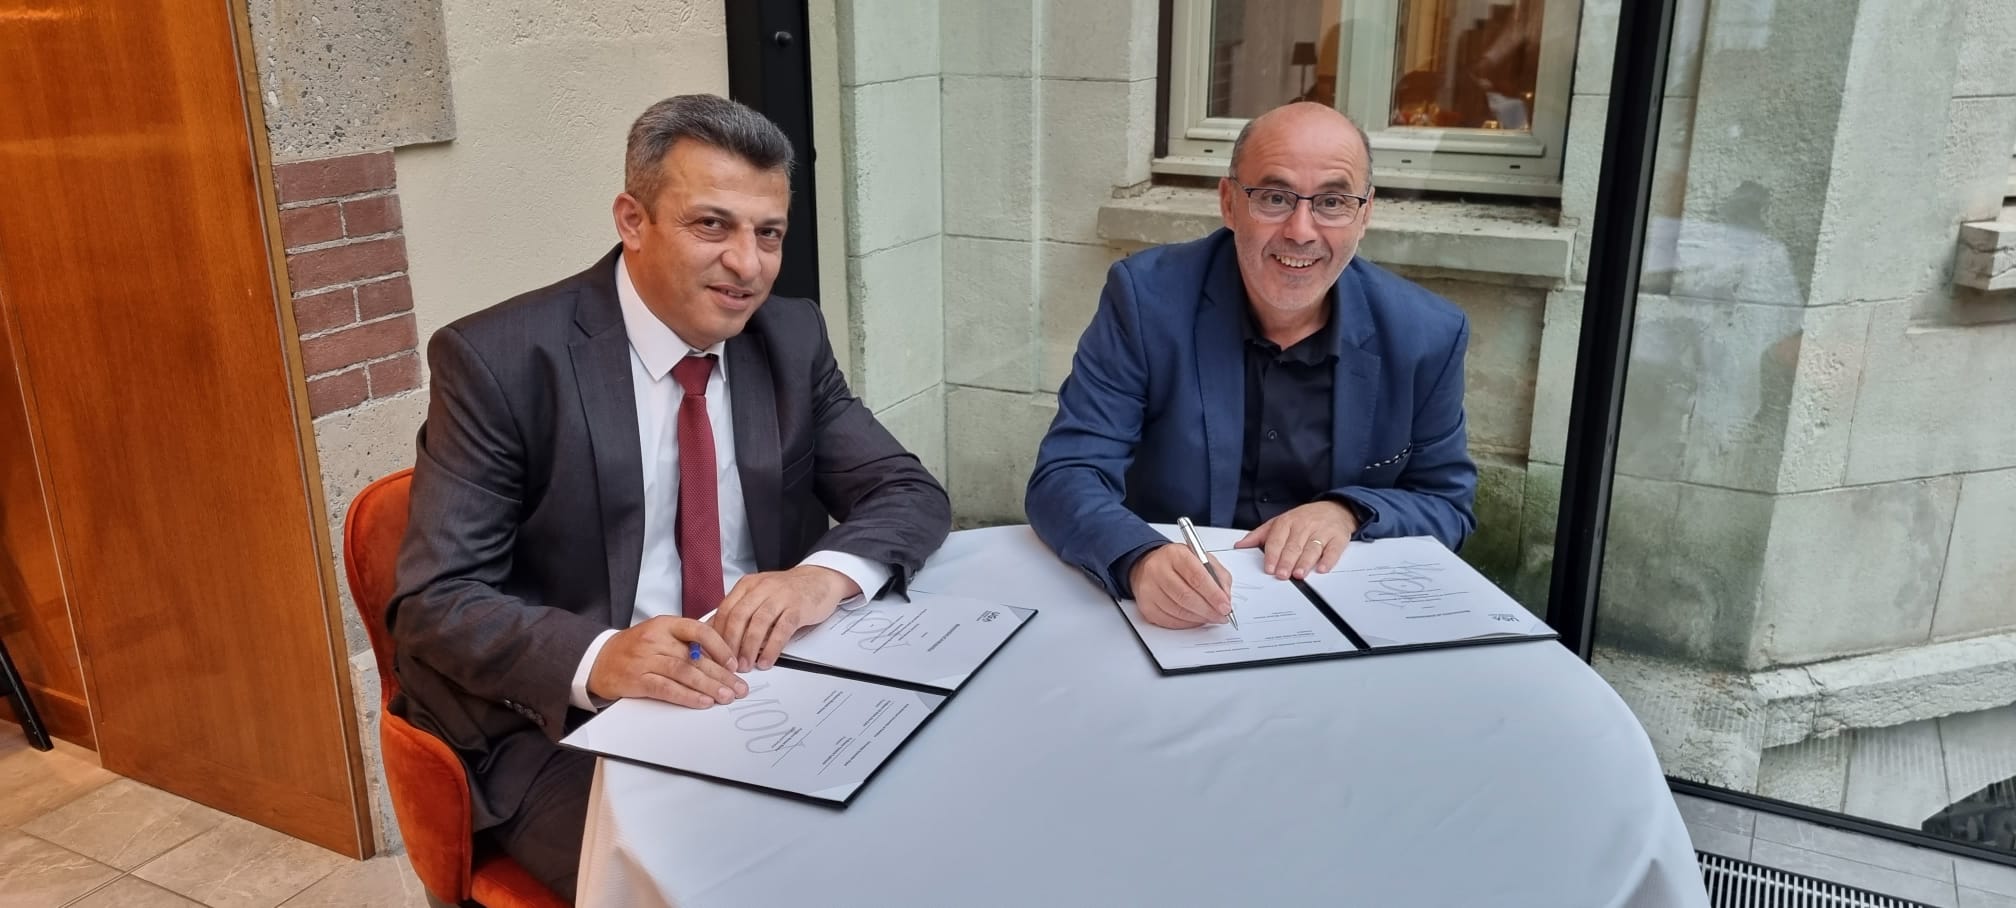 AAUP Signs a Memorandum of Understanding with the French Université Grenoble Alpes